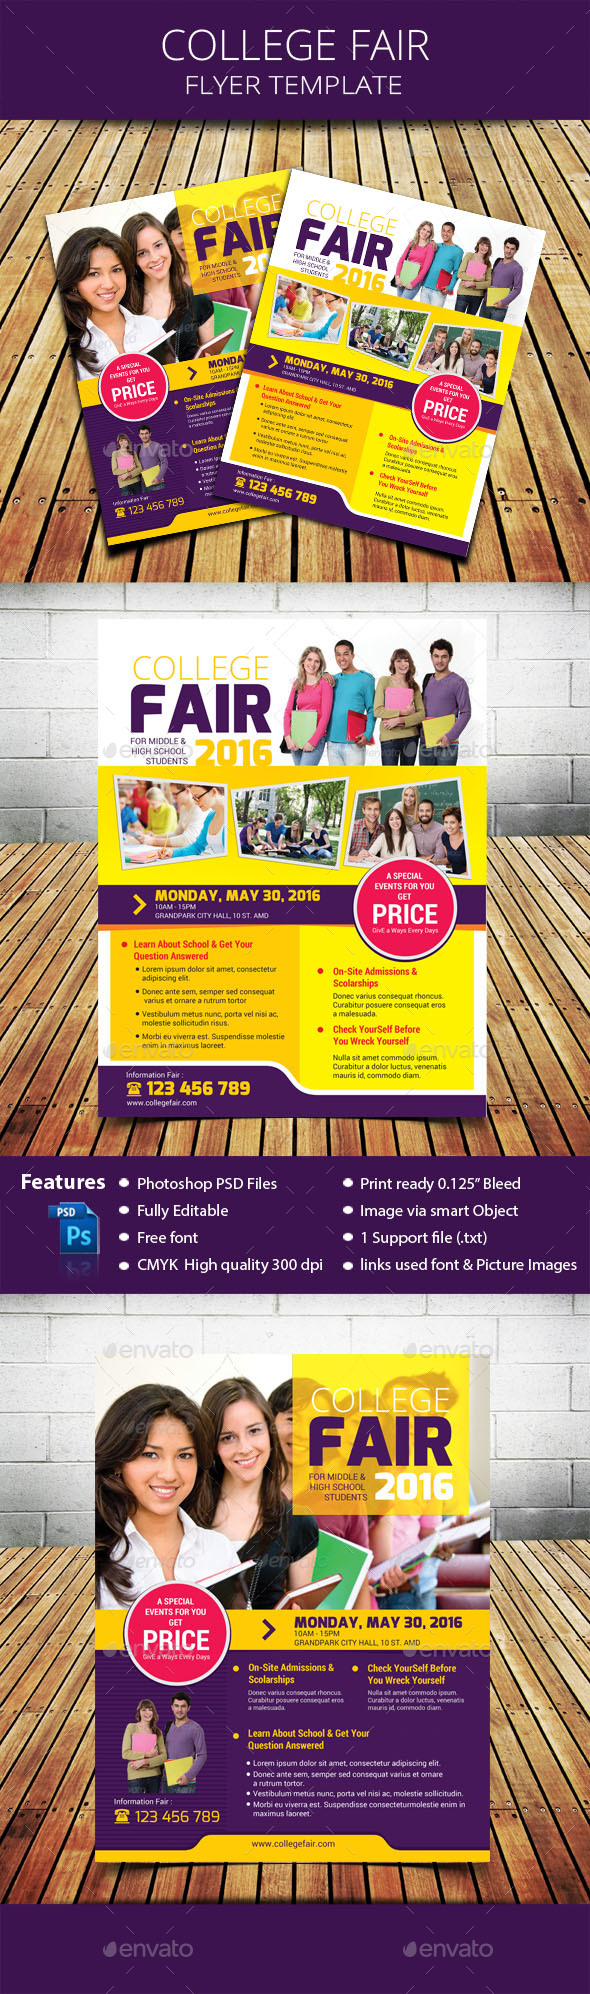 College Fair Flyer With Regard To College Fair Flyer Template With Regard To College Fair Flyer Template